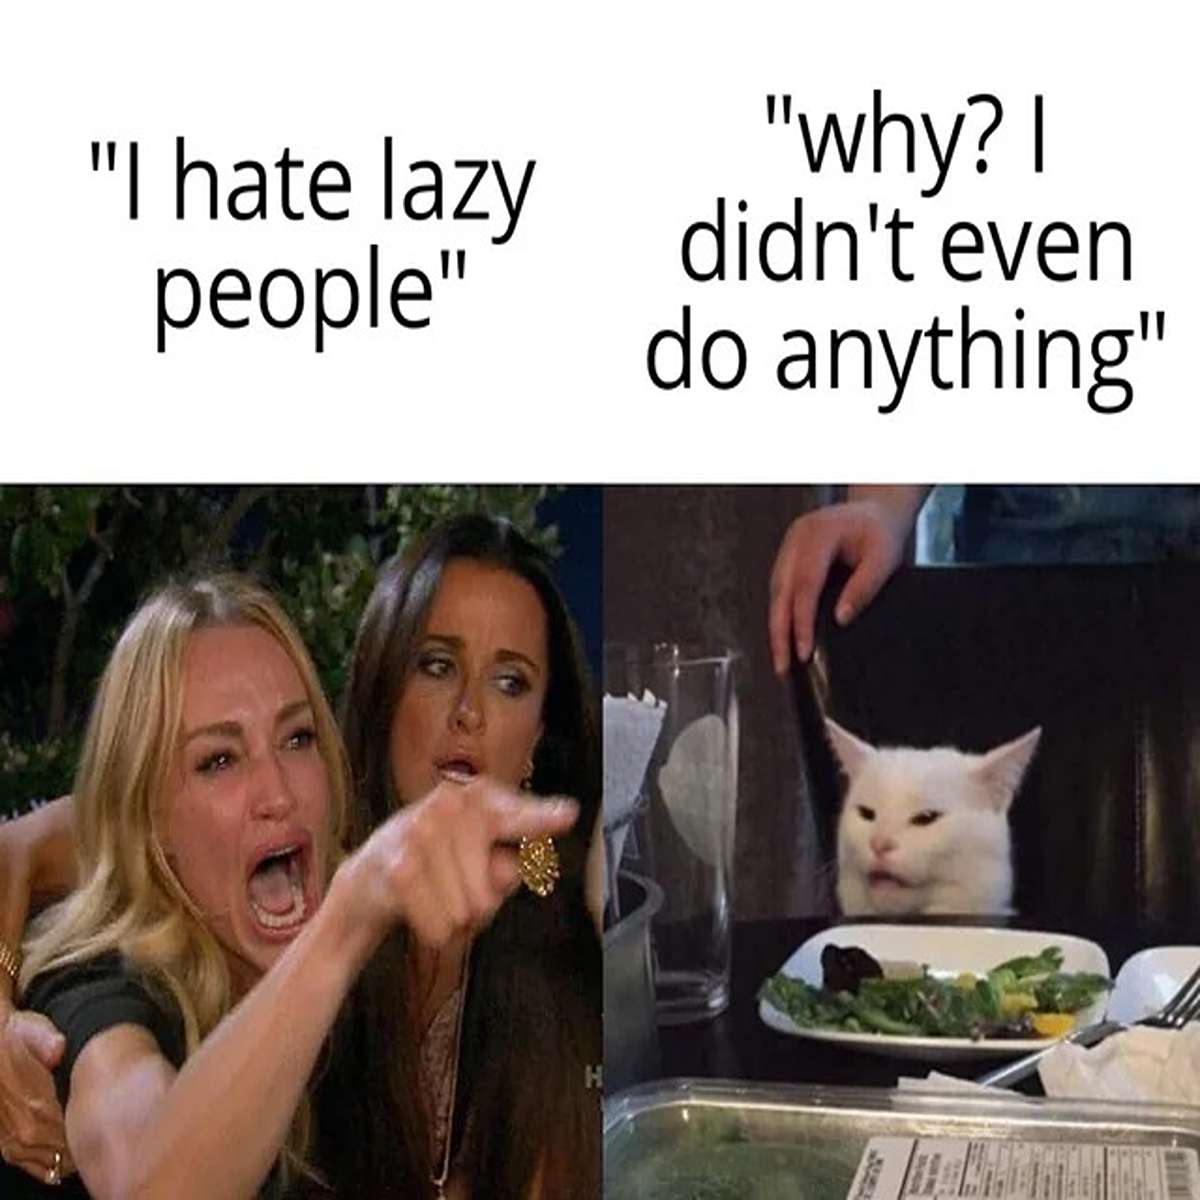 dank memes - photo caption - "I hate lazy people" H didn't even "why? I do anything" Jule